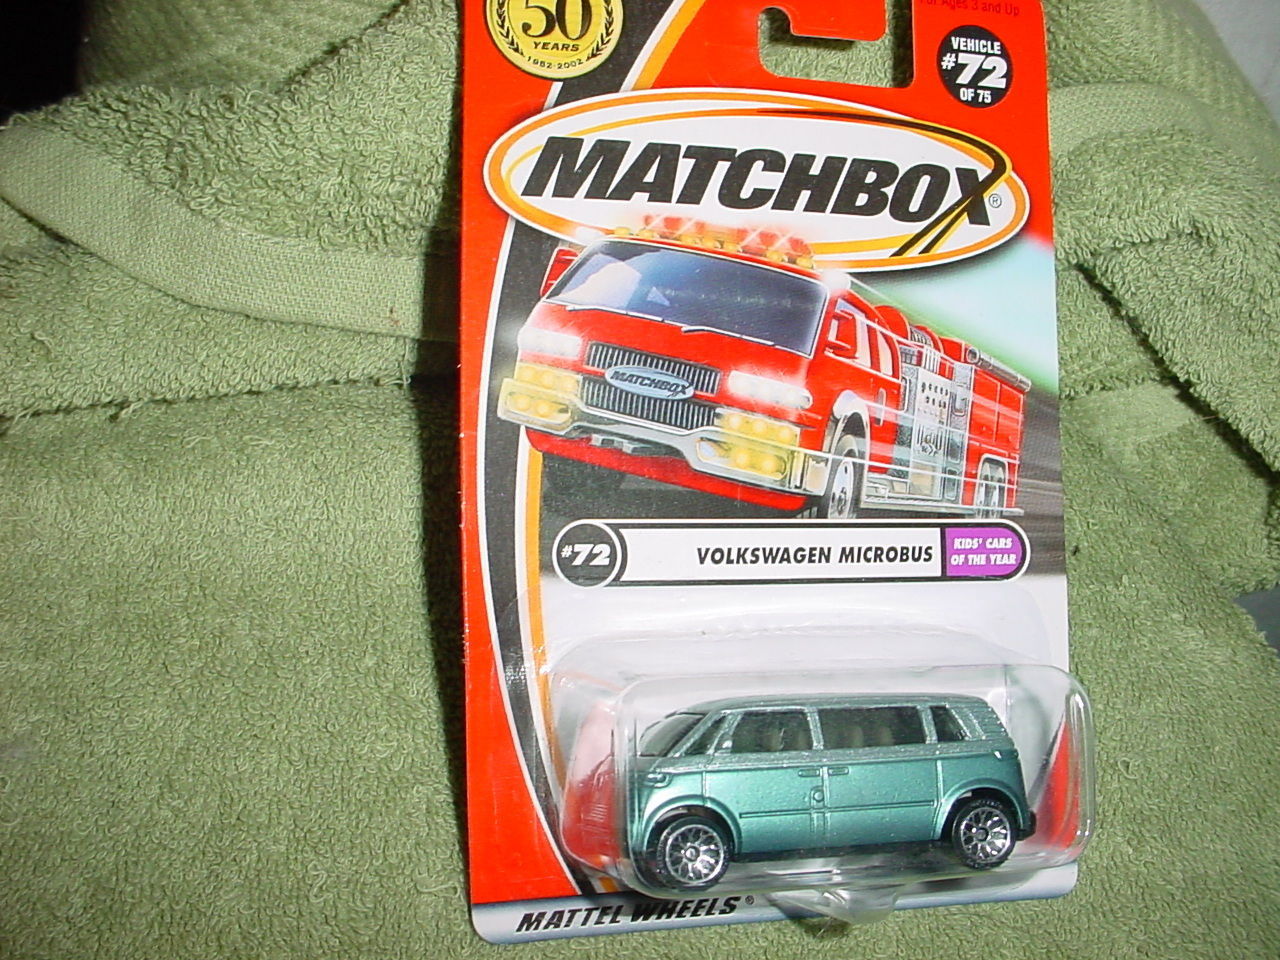 MATCHBOX VW VOLKSWAGEN MICROBUS  #72/75 1/64 2001 RELEASE MINT ON CARD FREE SHIP - $7.69